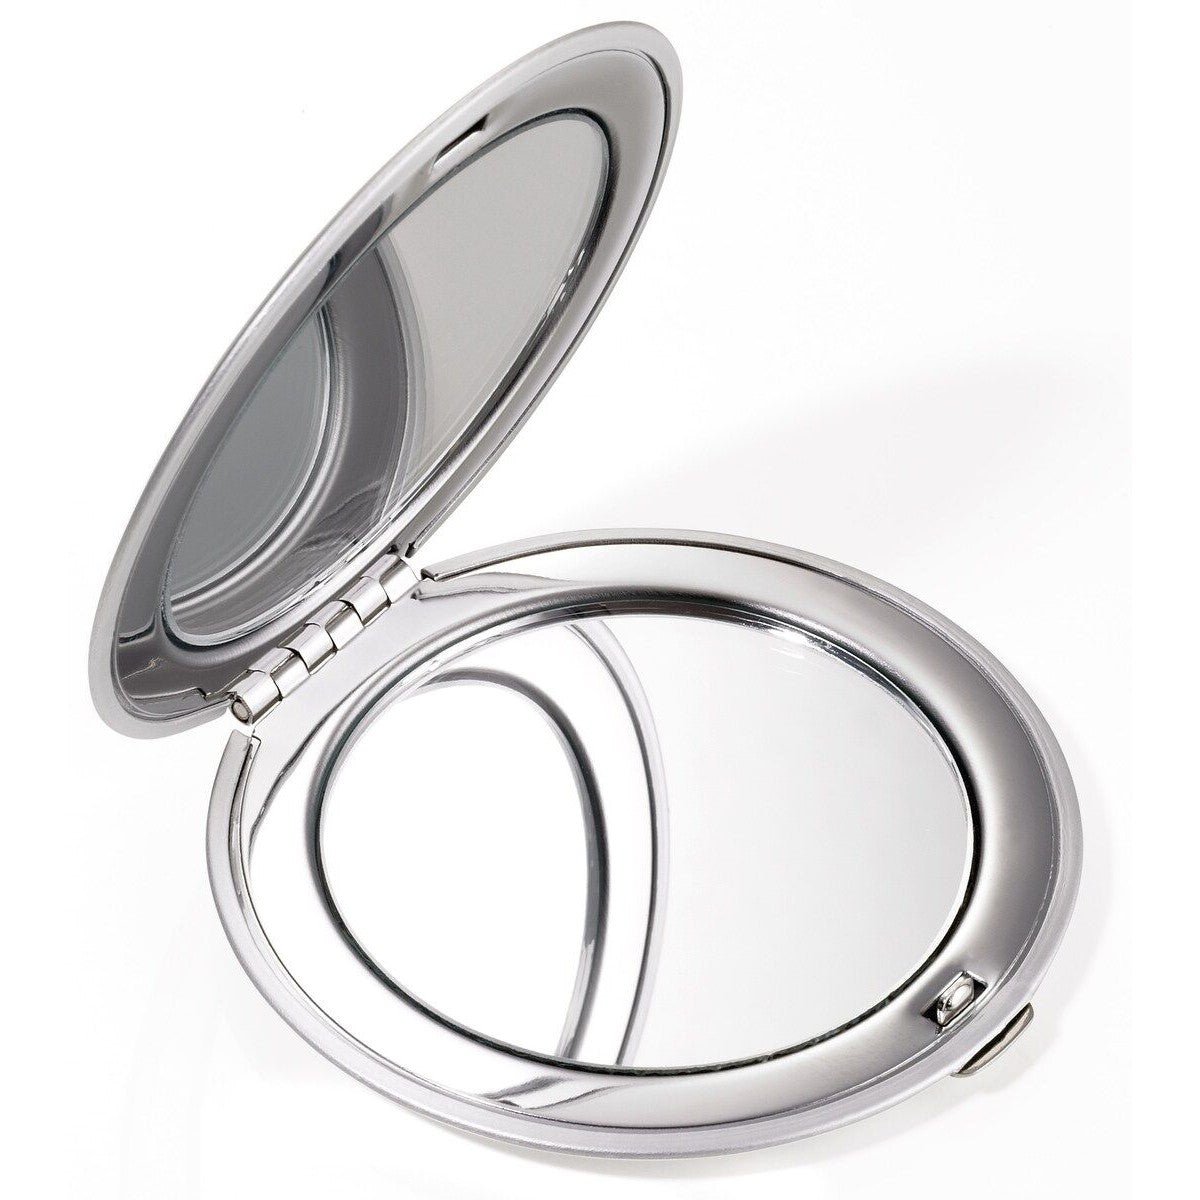 TROIKA Magnifying Handbag Mirror - Personalisable with your own Design